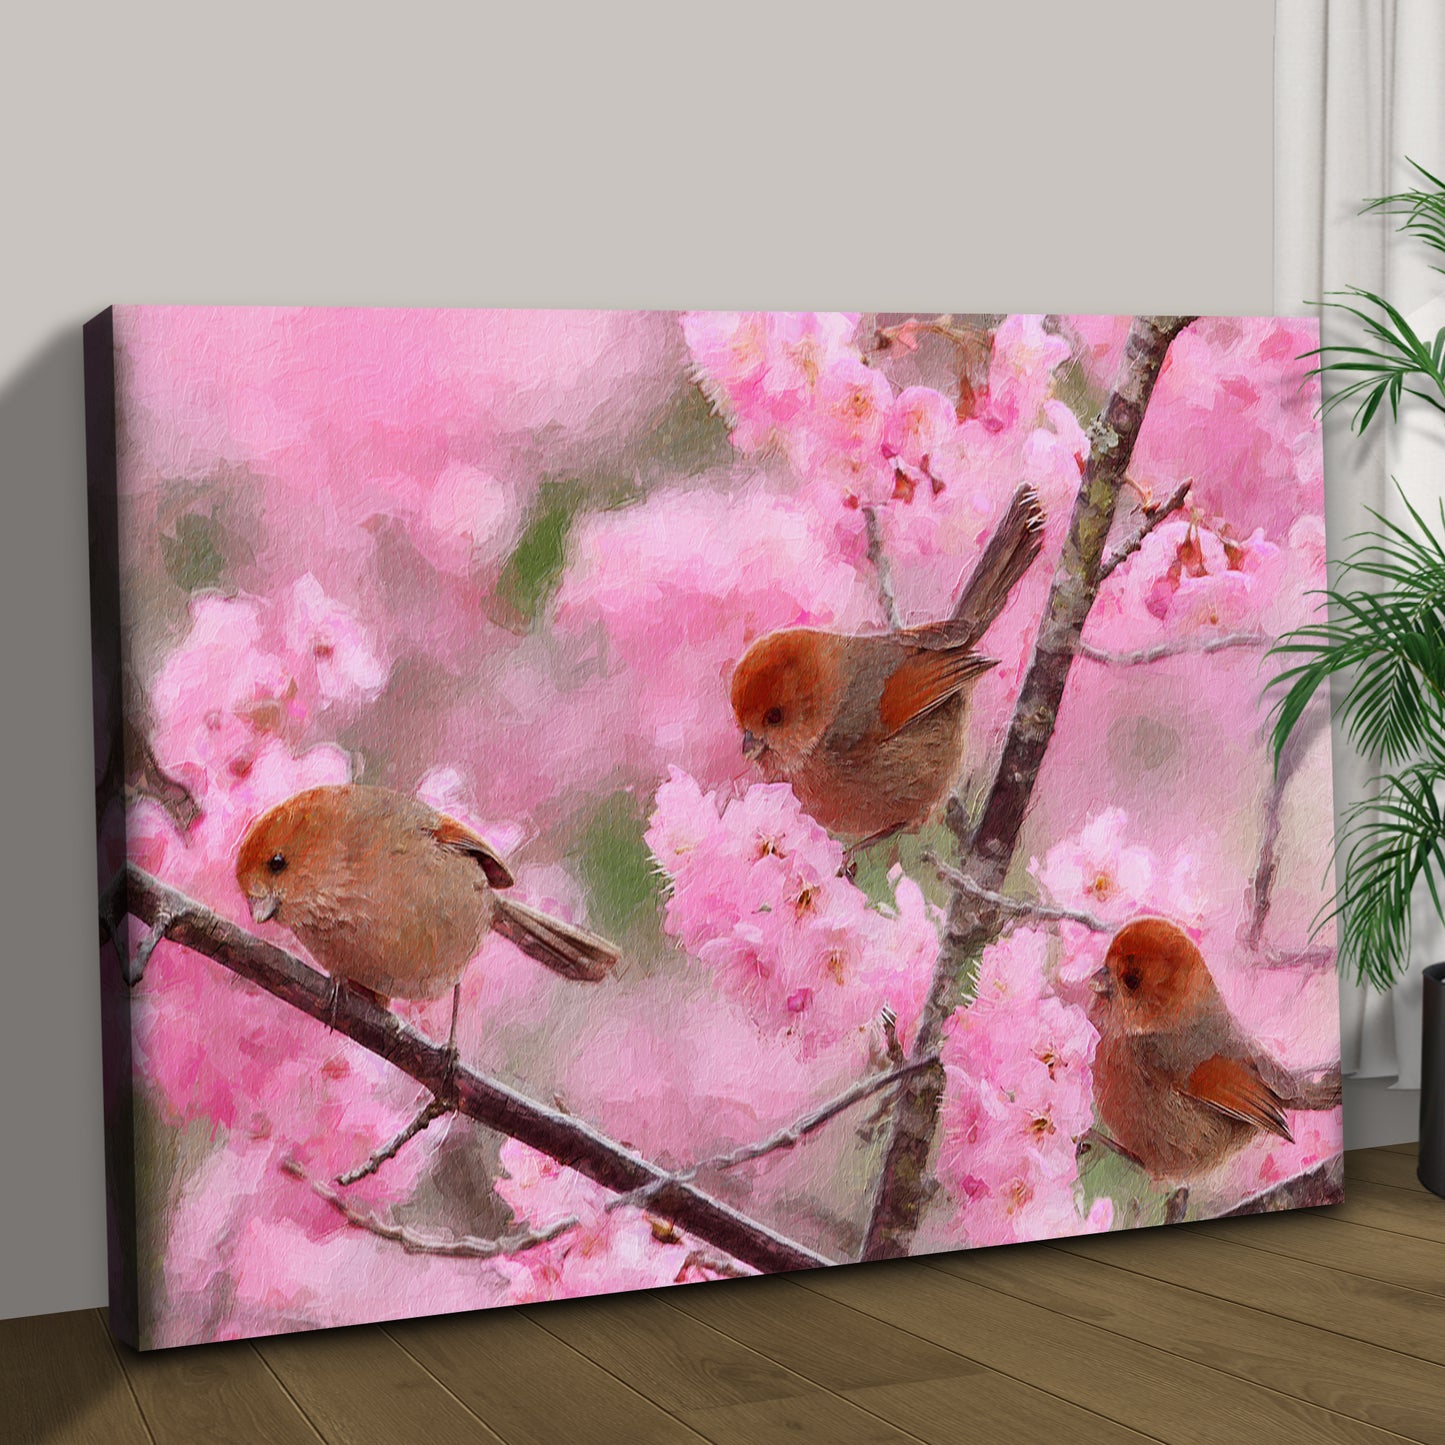 Birds on Cherry Blossom Tree Painting Canvas Wall Art Style 2 - Image by Tailored Canvases